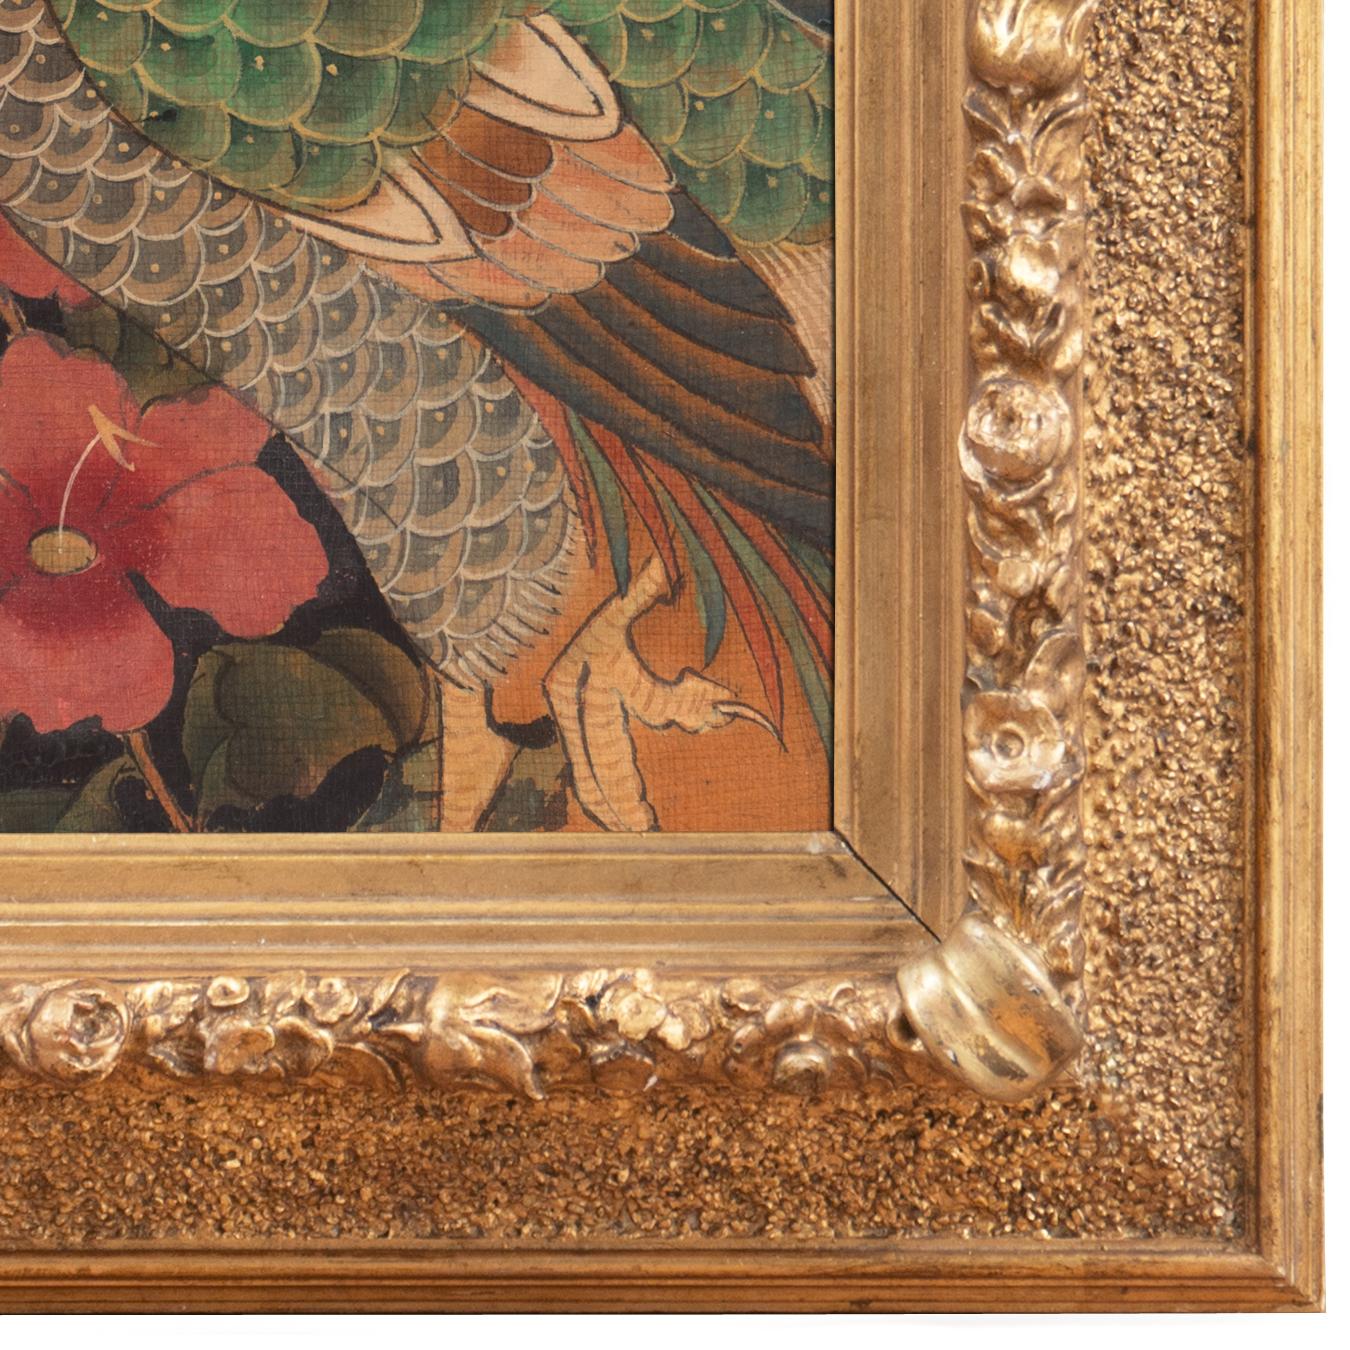 'Peacock Among Magnolia', Chinese Painting in Period Gilt Frame - Academic Art by 19th Century Chinese school